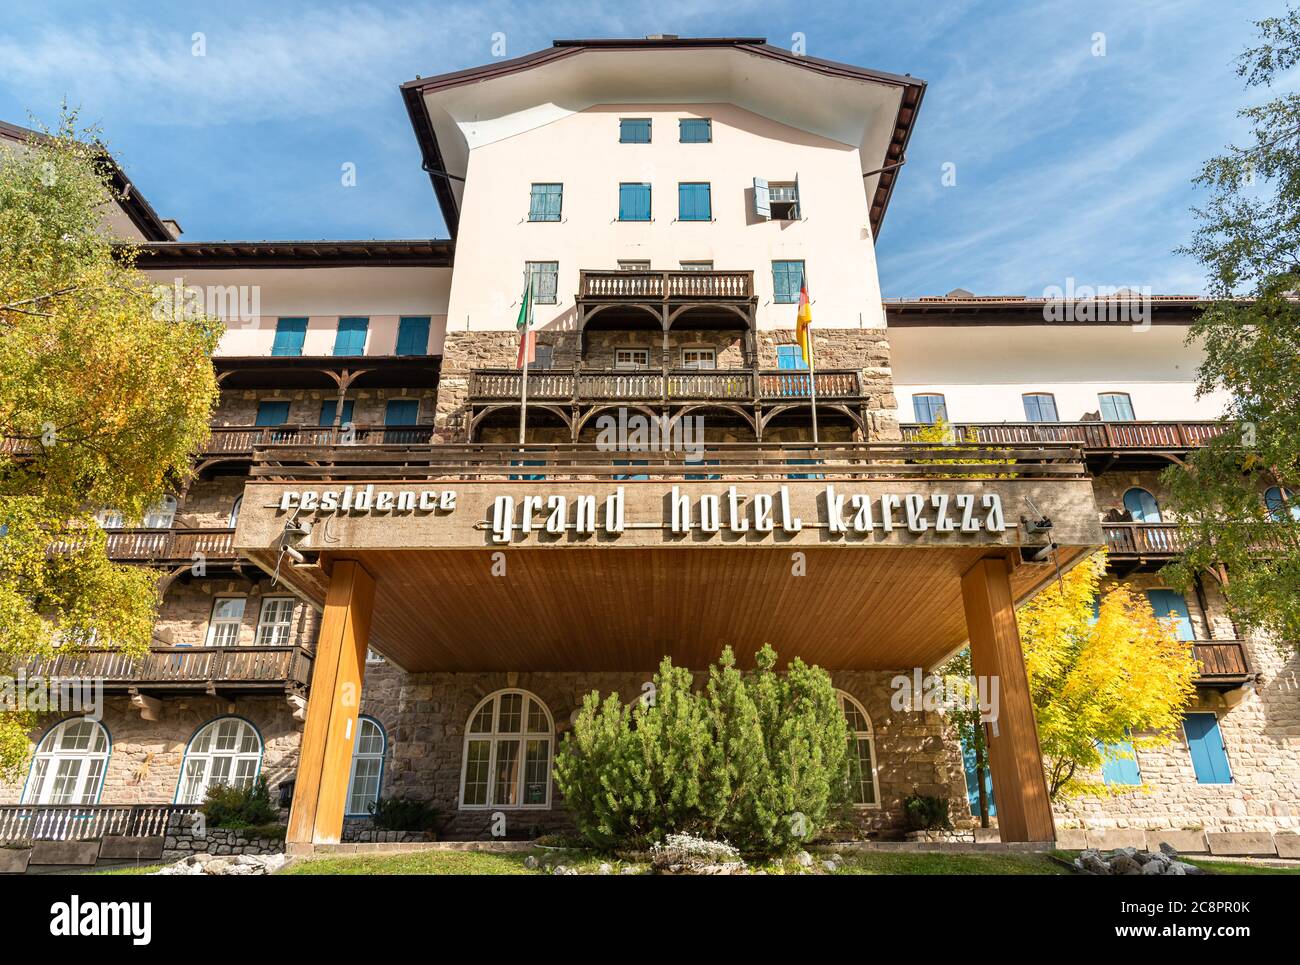 Carezza, South Tyrol, Italy - October 13, 2019: View of Grand Hotel Carezza, is one of the most important Alpine hotels in Dolomites, Italy Stock Photo